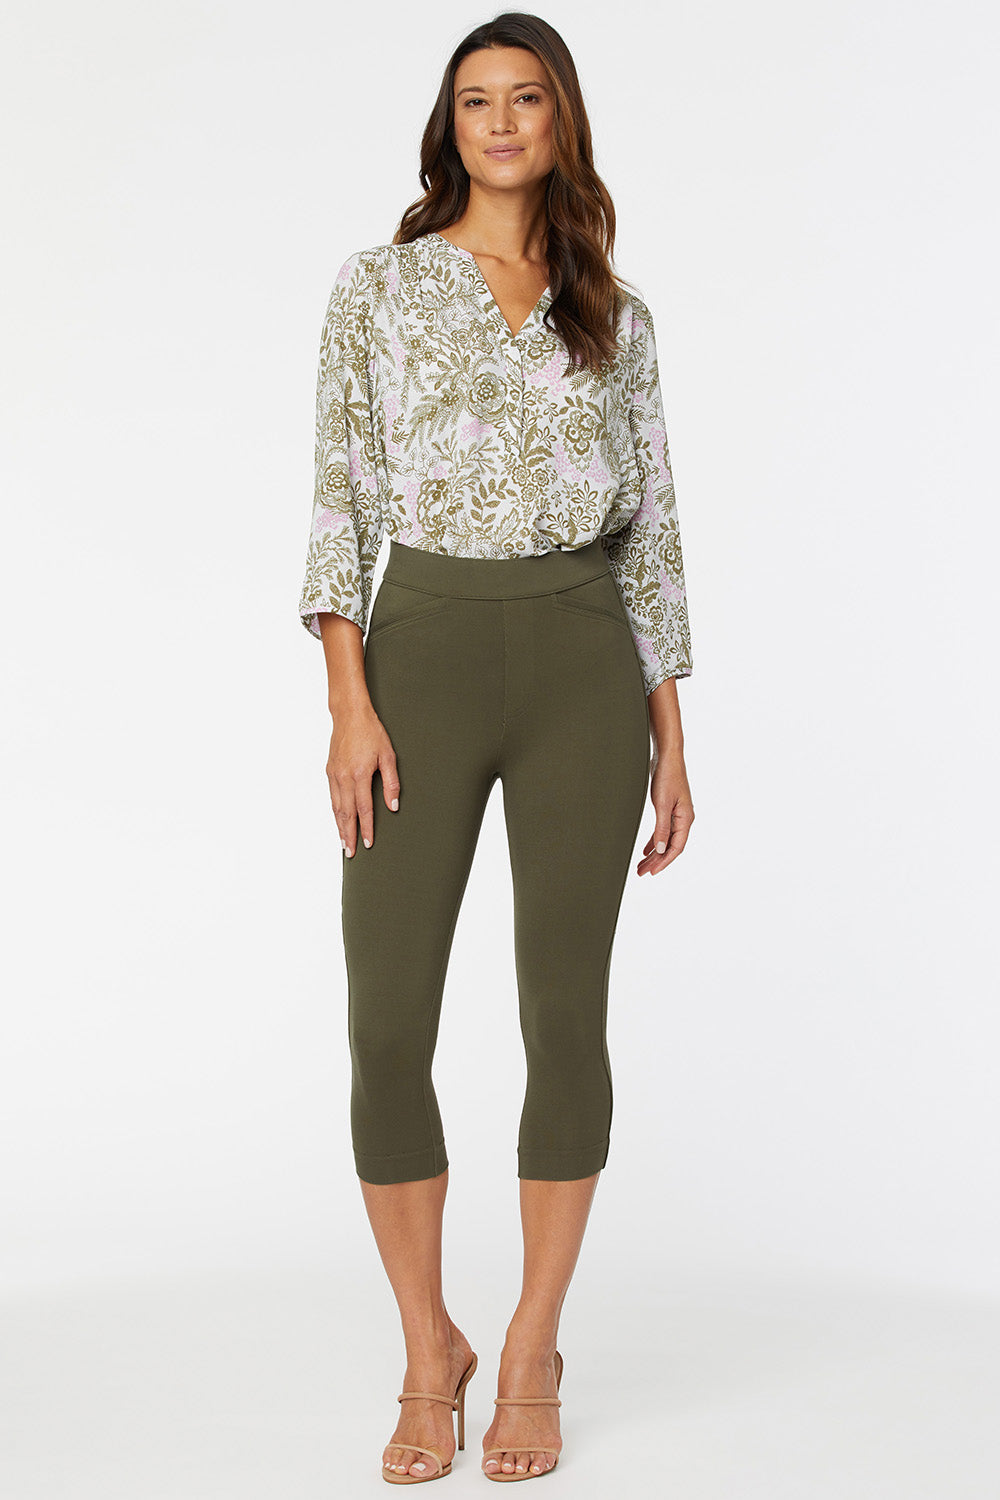 International Concepts Women's Pull-On Ponte Pants Olive Drab 12